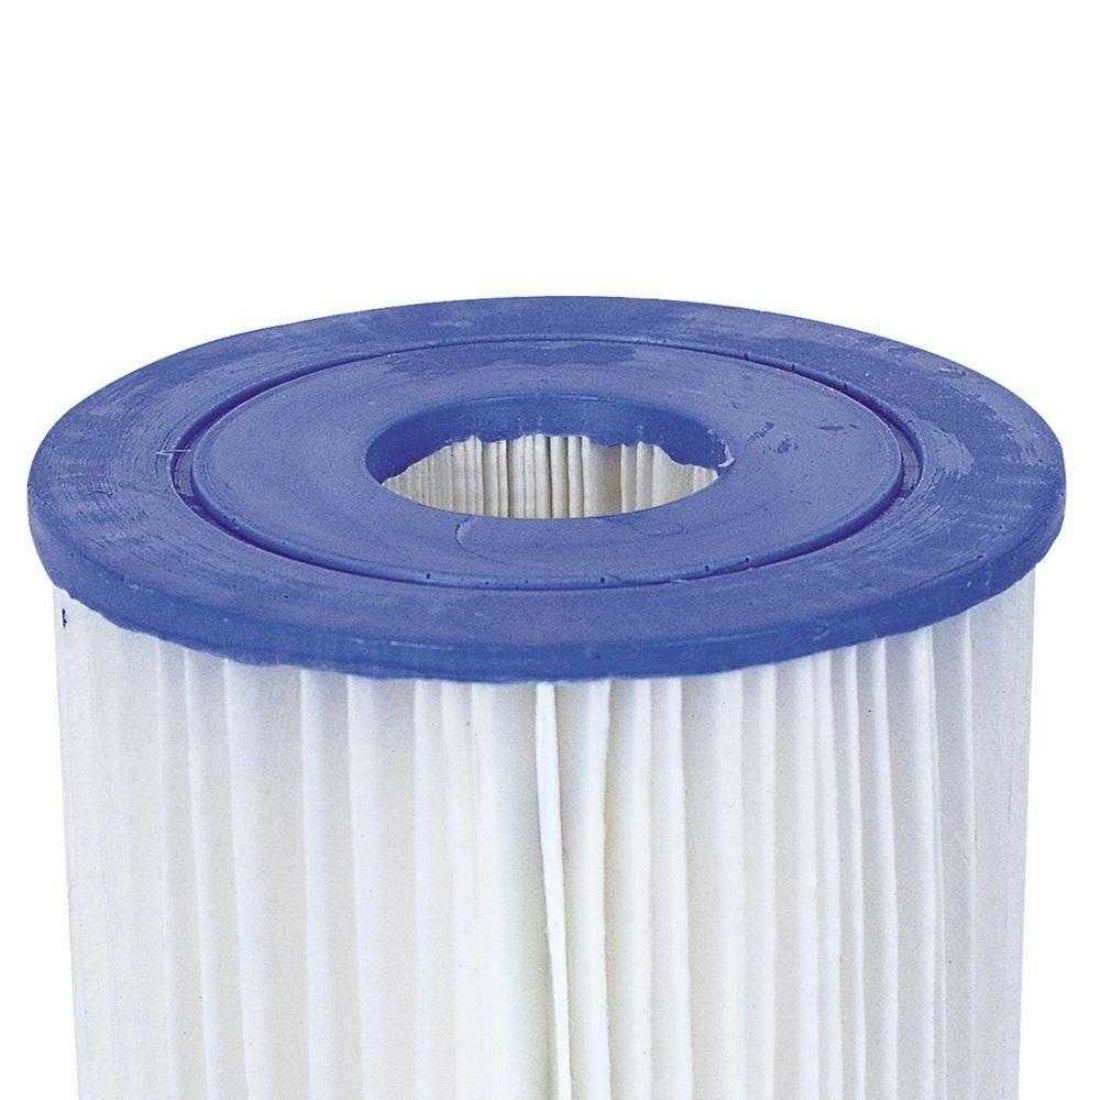 Bestway Cartridge Filter For Above Ground Swimming Pool 2500 Gal/H Pump 58095